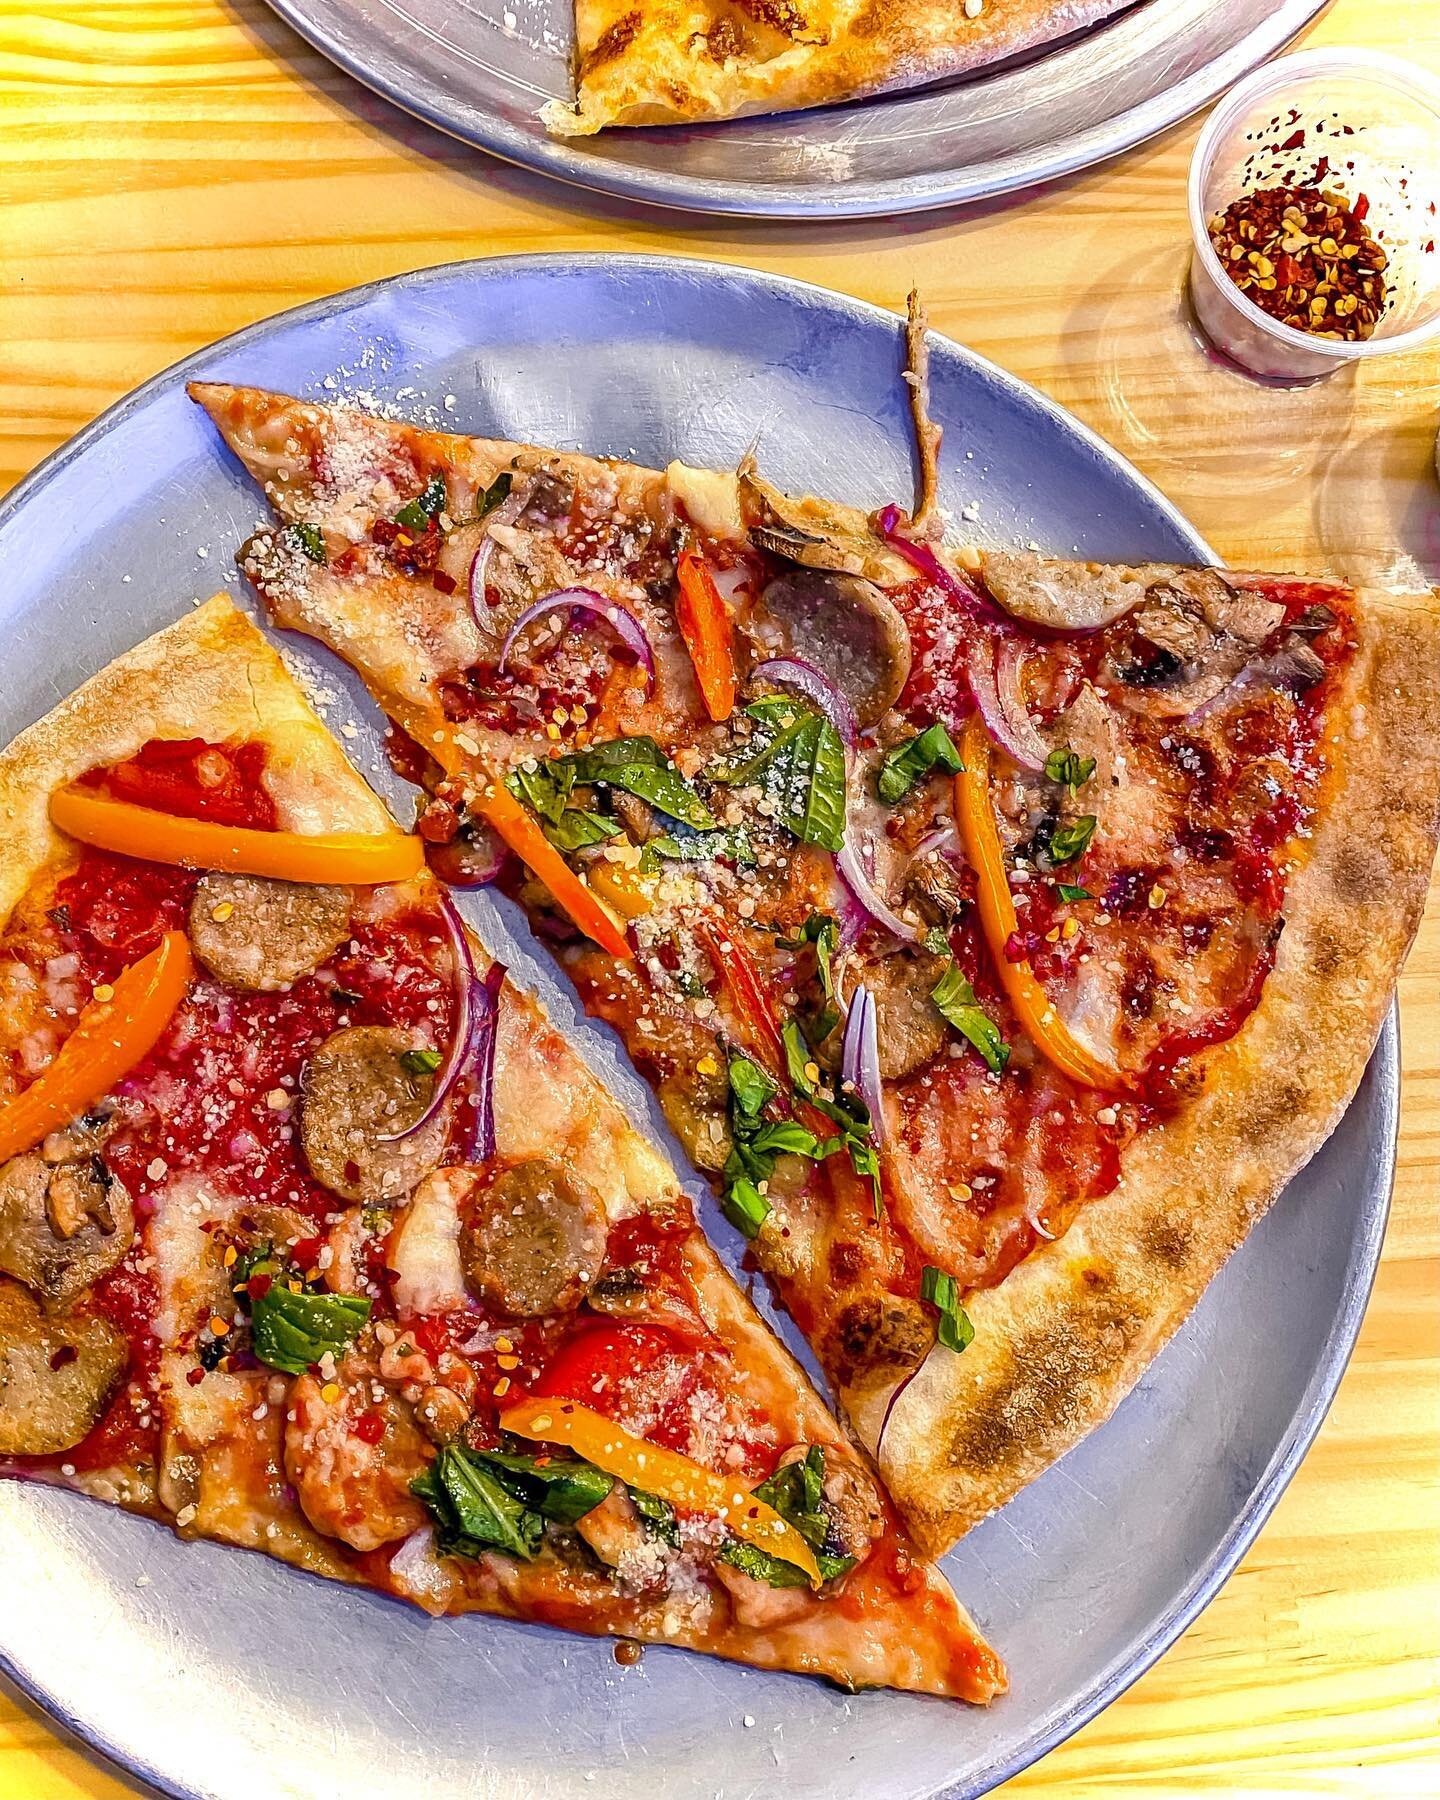 Anybody craving NY style pizza right now?? 🍕🍕🍕 @difarapizzatavern just opened a location in Downtown Cary slinging Brooklyn style pies that has taken Cary by storm. The menu is pretty limited and on the pricey side but the pizzas are large and the